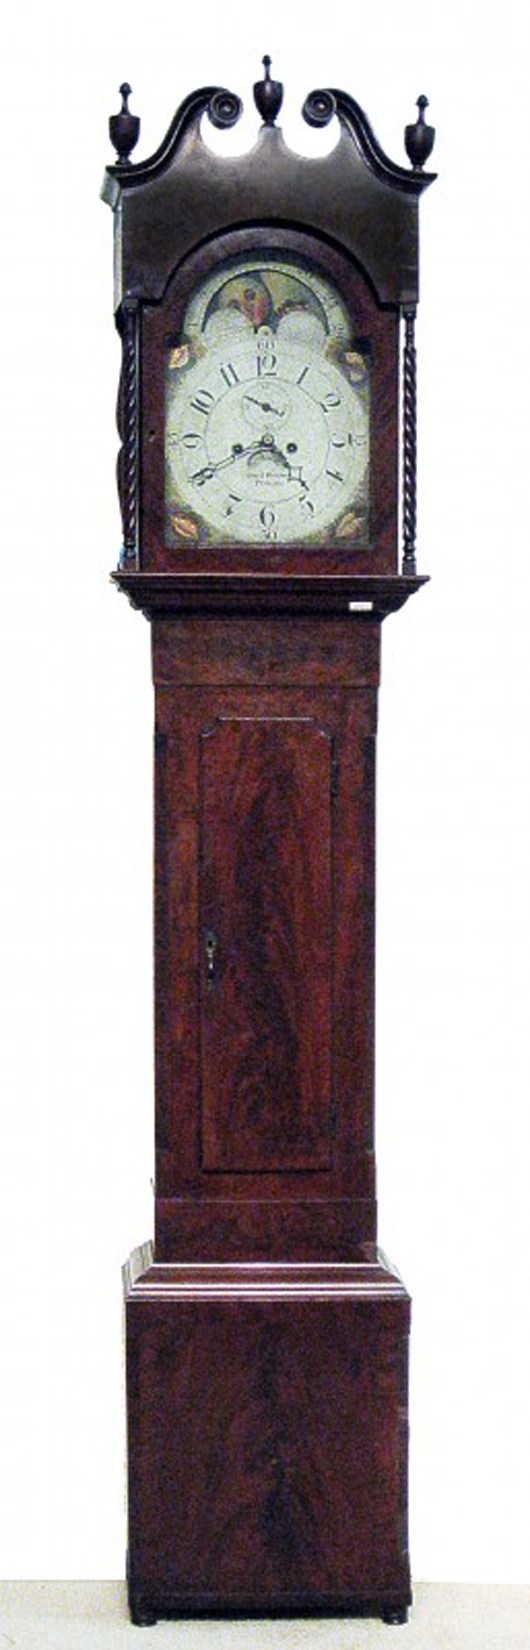 Bidding on this fine mahogany tall-case clock signed David Weatherly of Philadelphia, 97 inches tall, reached $3,525. Image courtesy of Gordon S. Converse & Co.